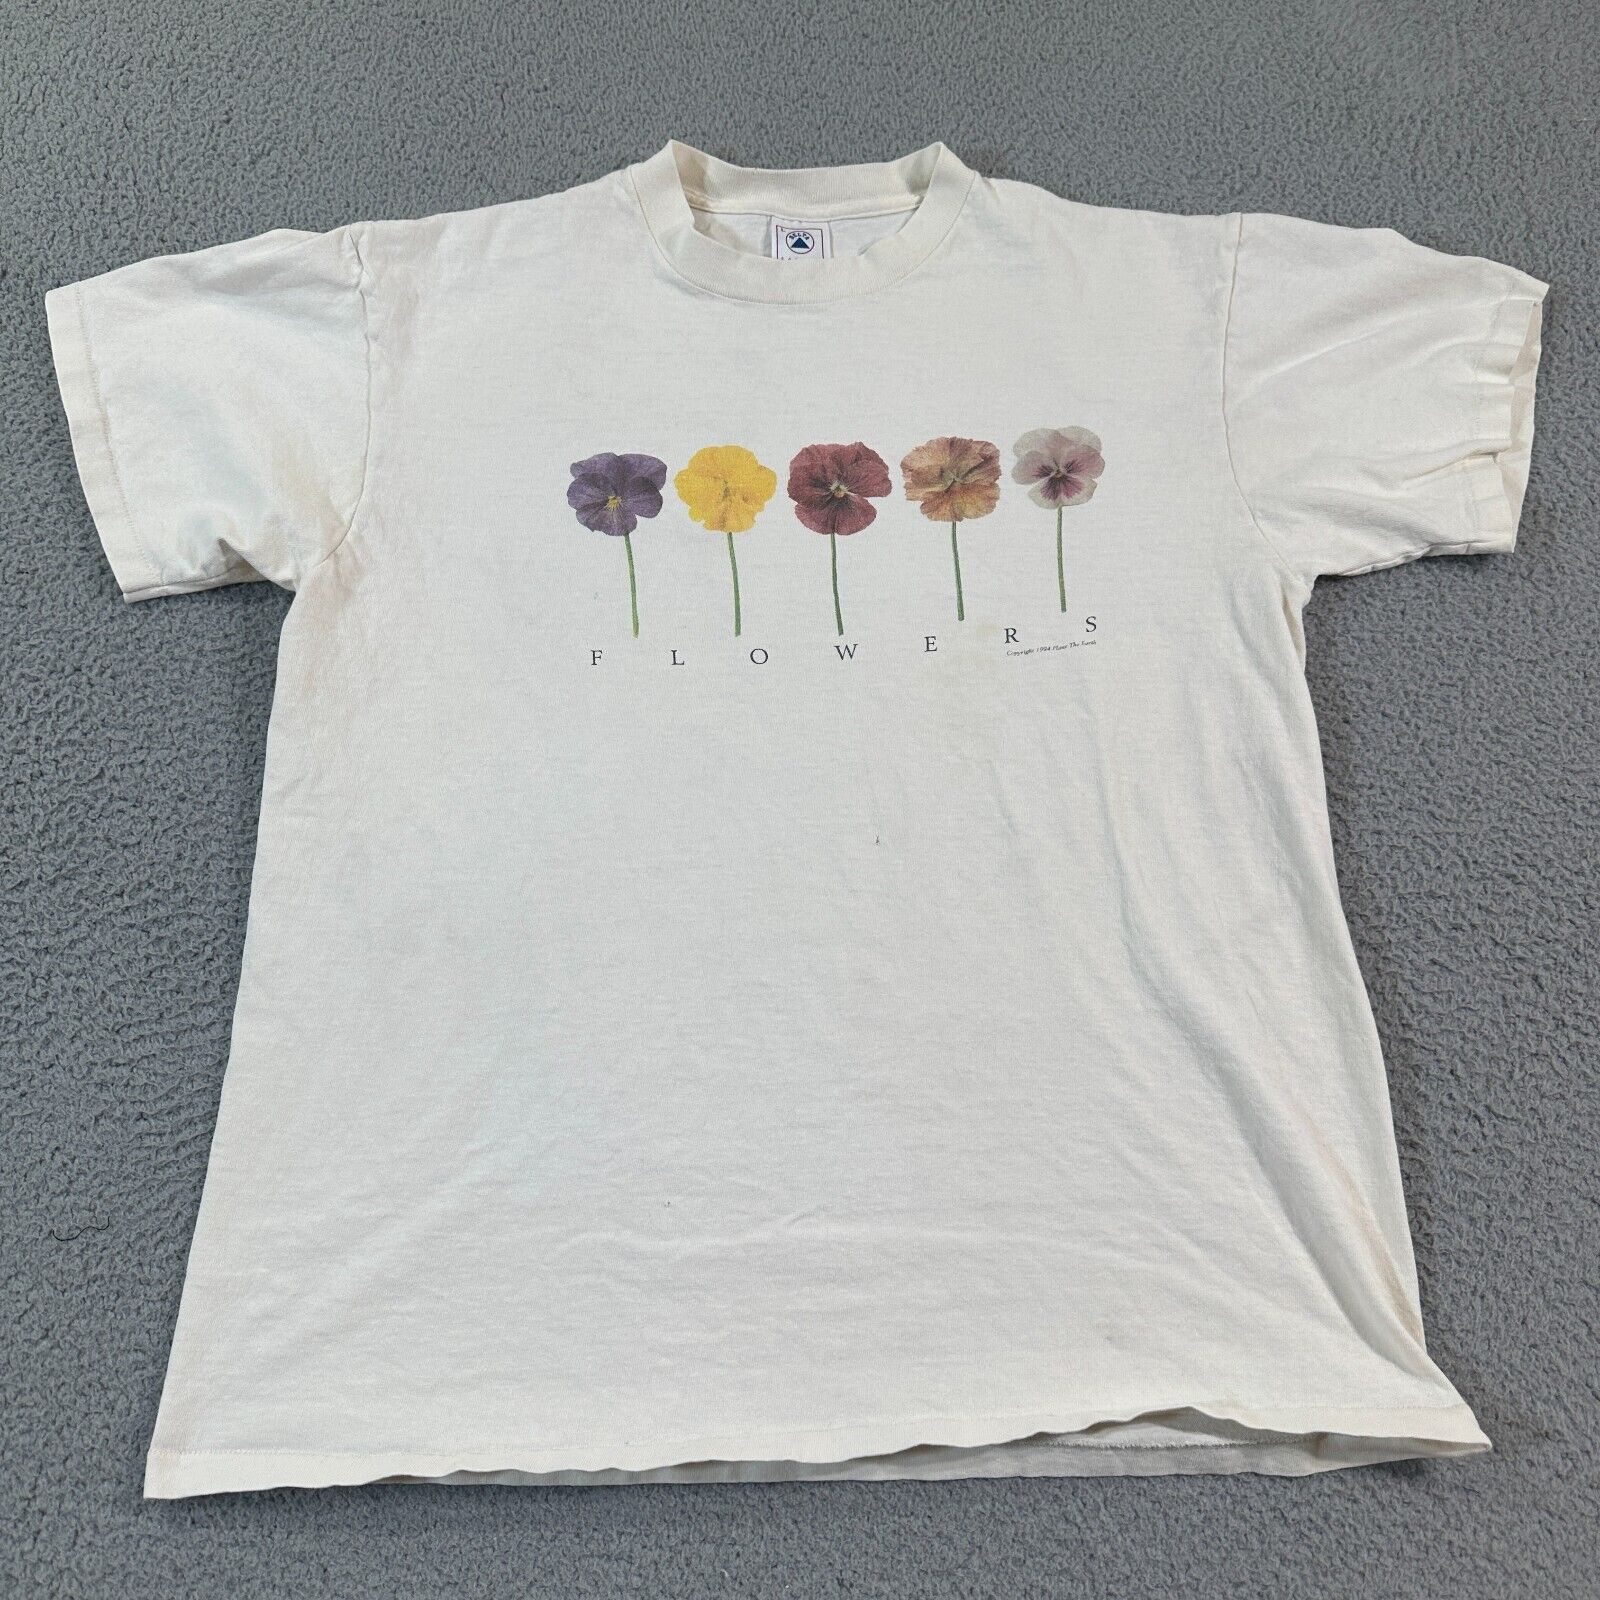 Vintage 1995 Planet Earth “ Flowers” T-Shirt White Tee Size Large Made In USA